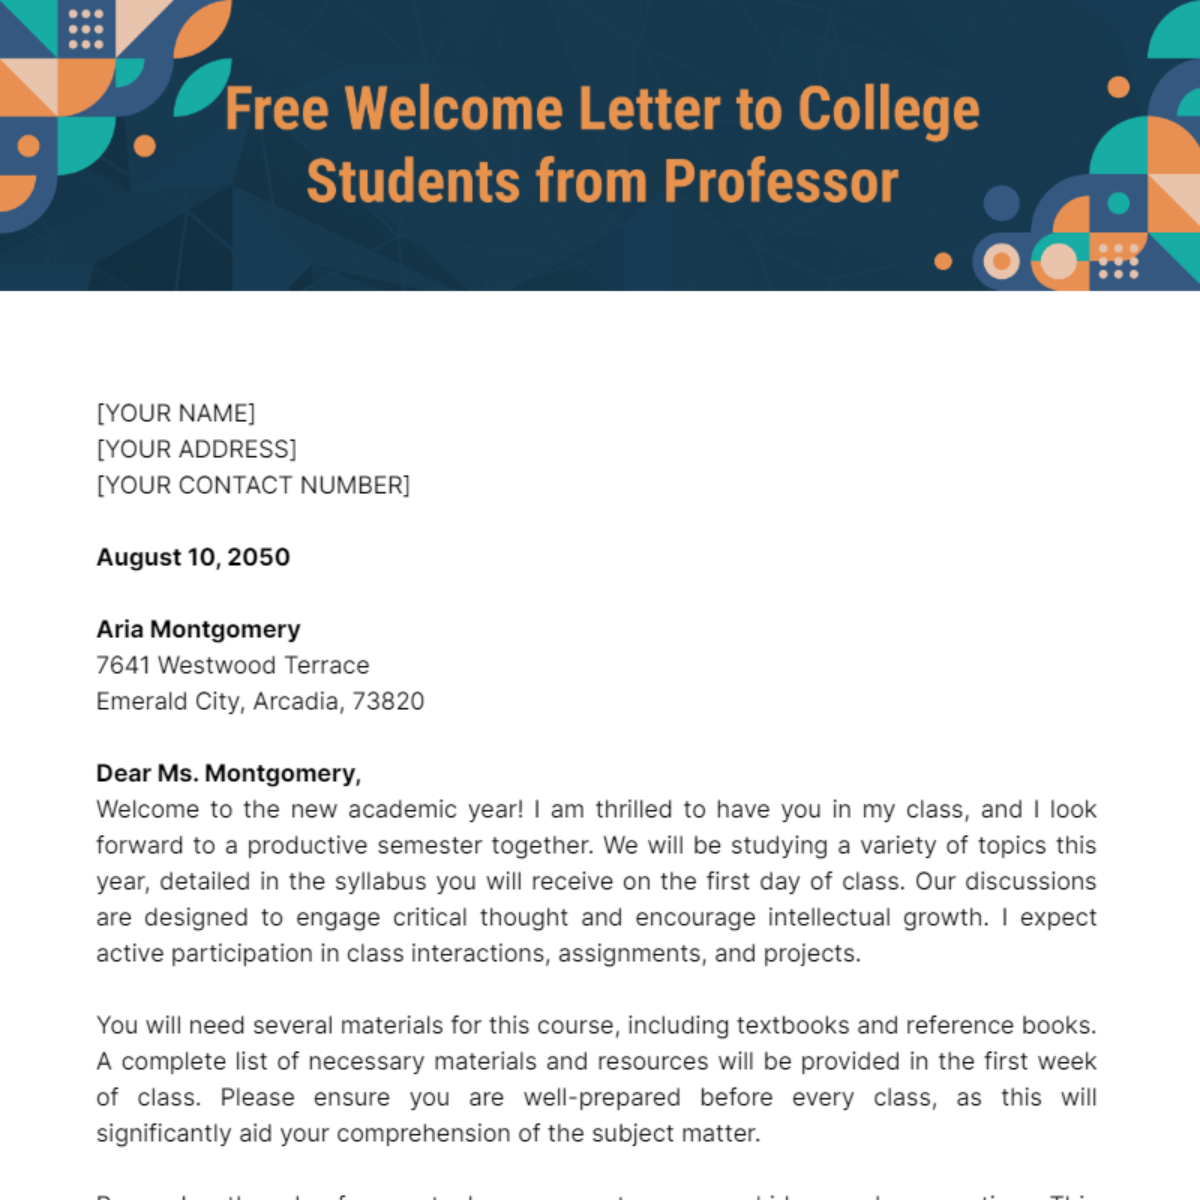 Welcome Letter to College Students from Professor Template